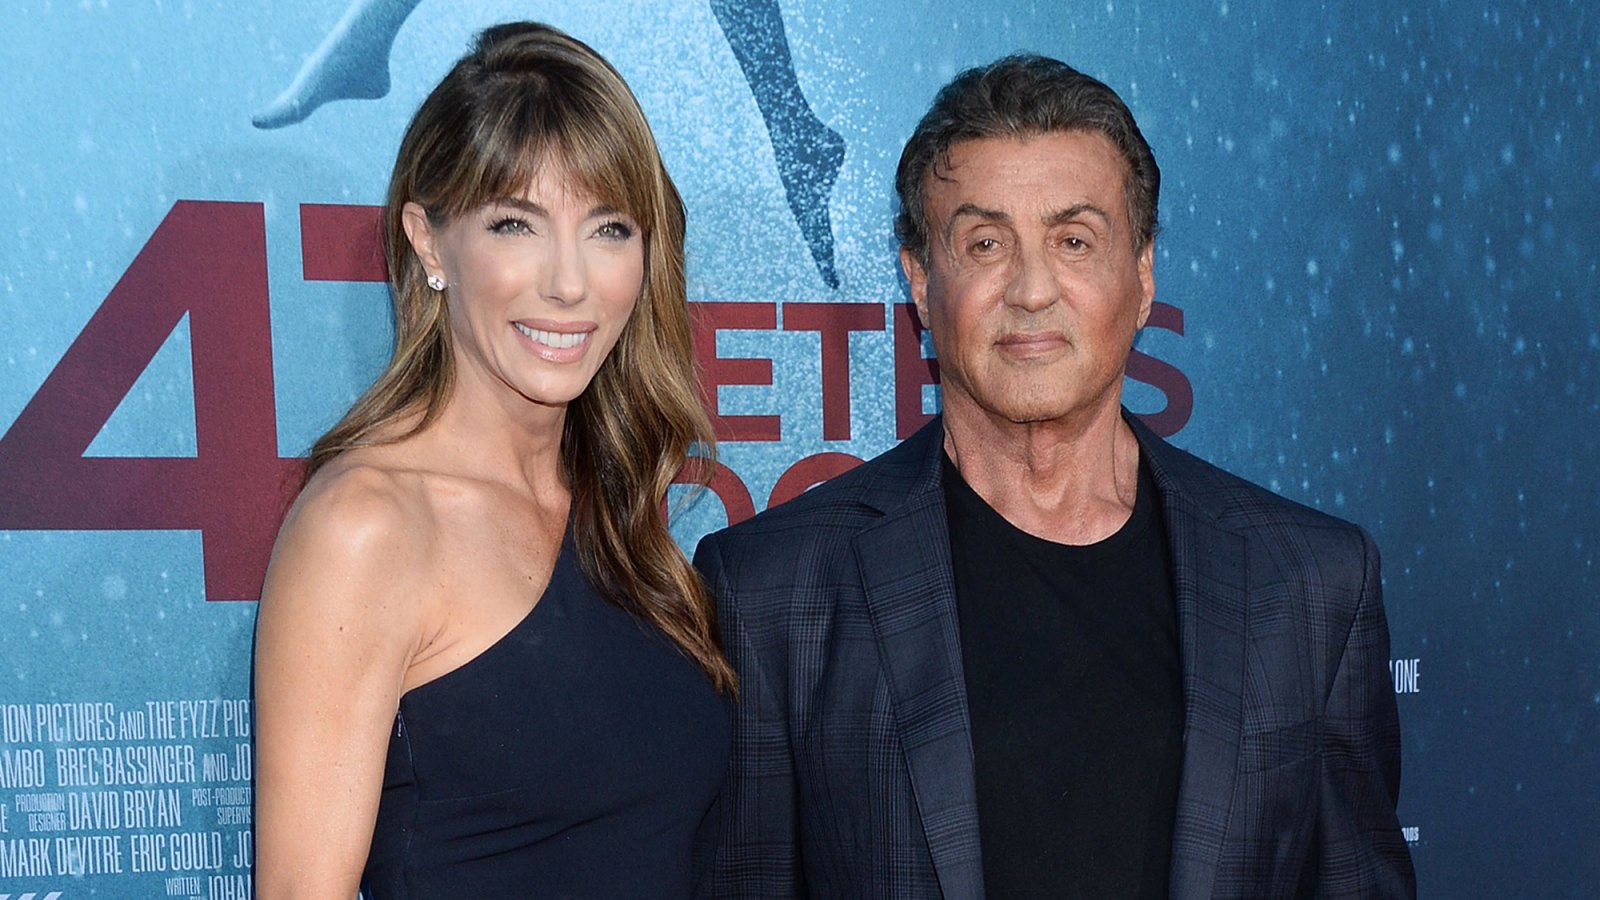 Sylvester Stallone Shares Photo Holding Hands With Estranged Wife Jennifer Flavin Amid Divorce